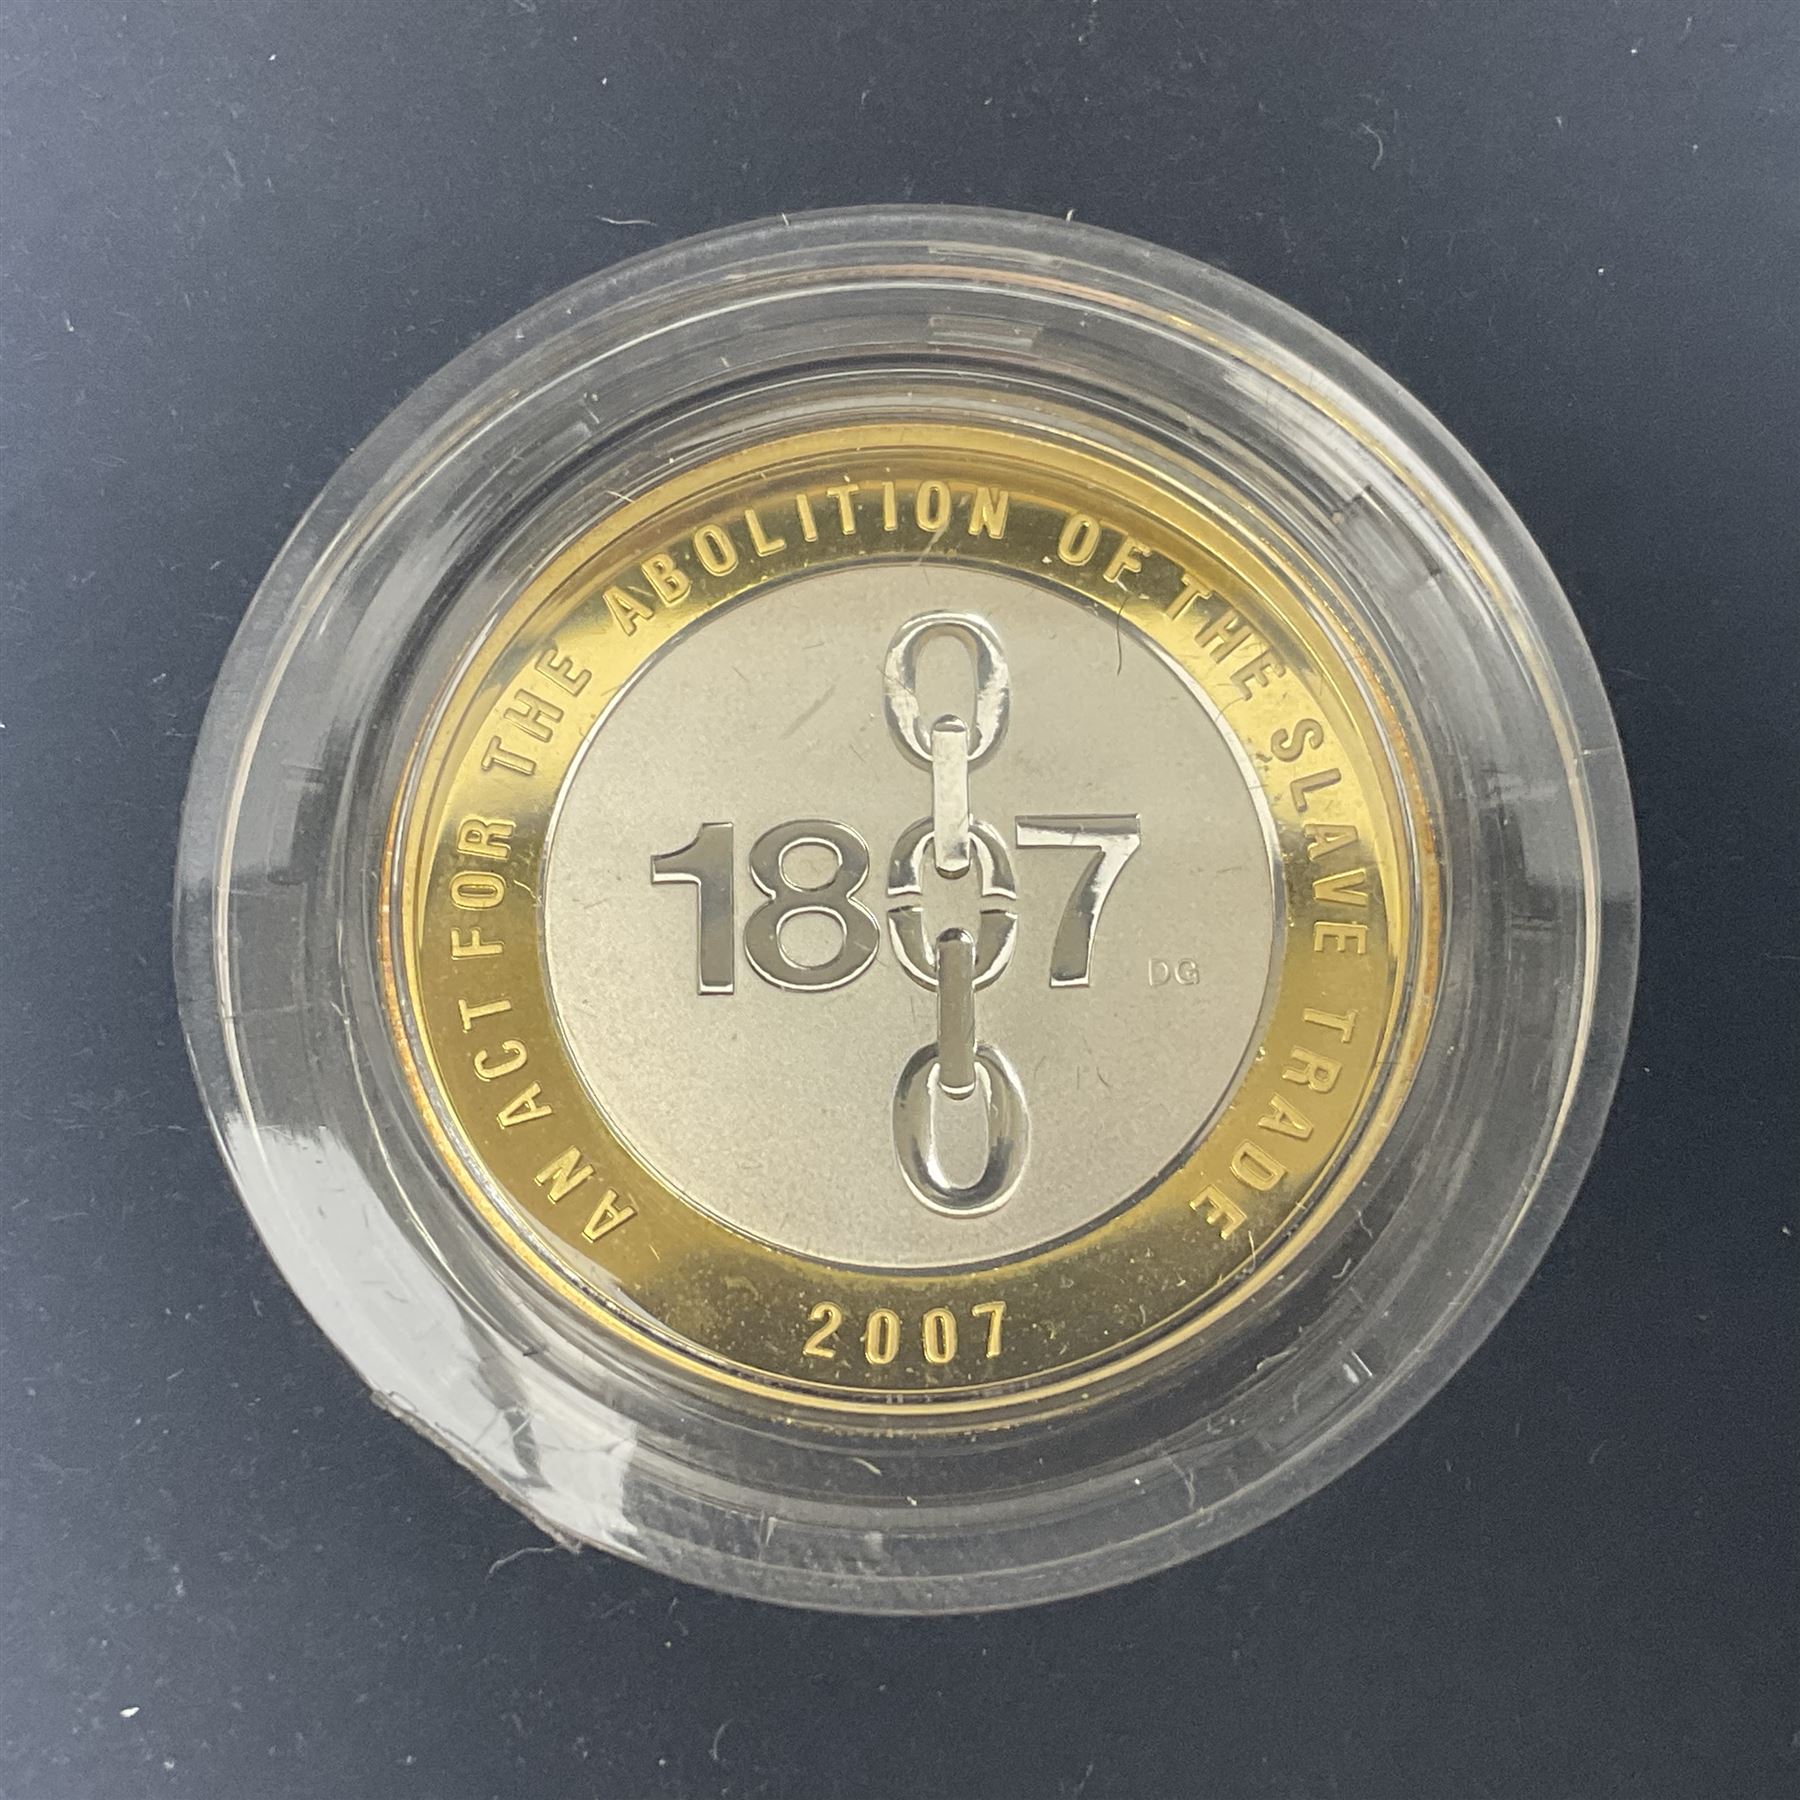 The Royal Mint United Kingdom 2007 'Abolition of the Slave Trade' silver proof piedfort two pound co - Image 2 of 6